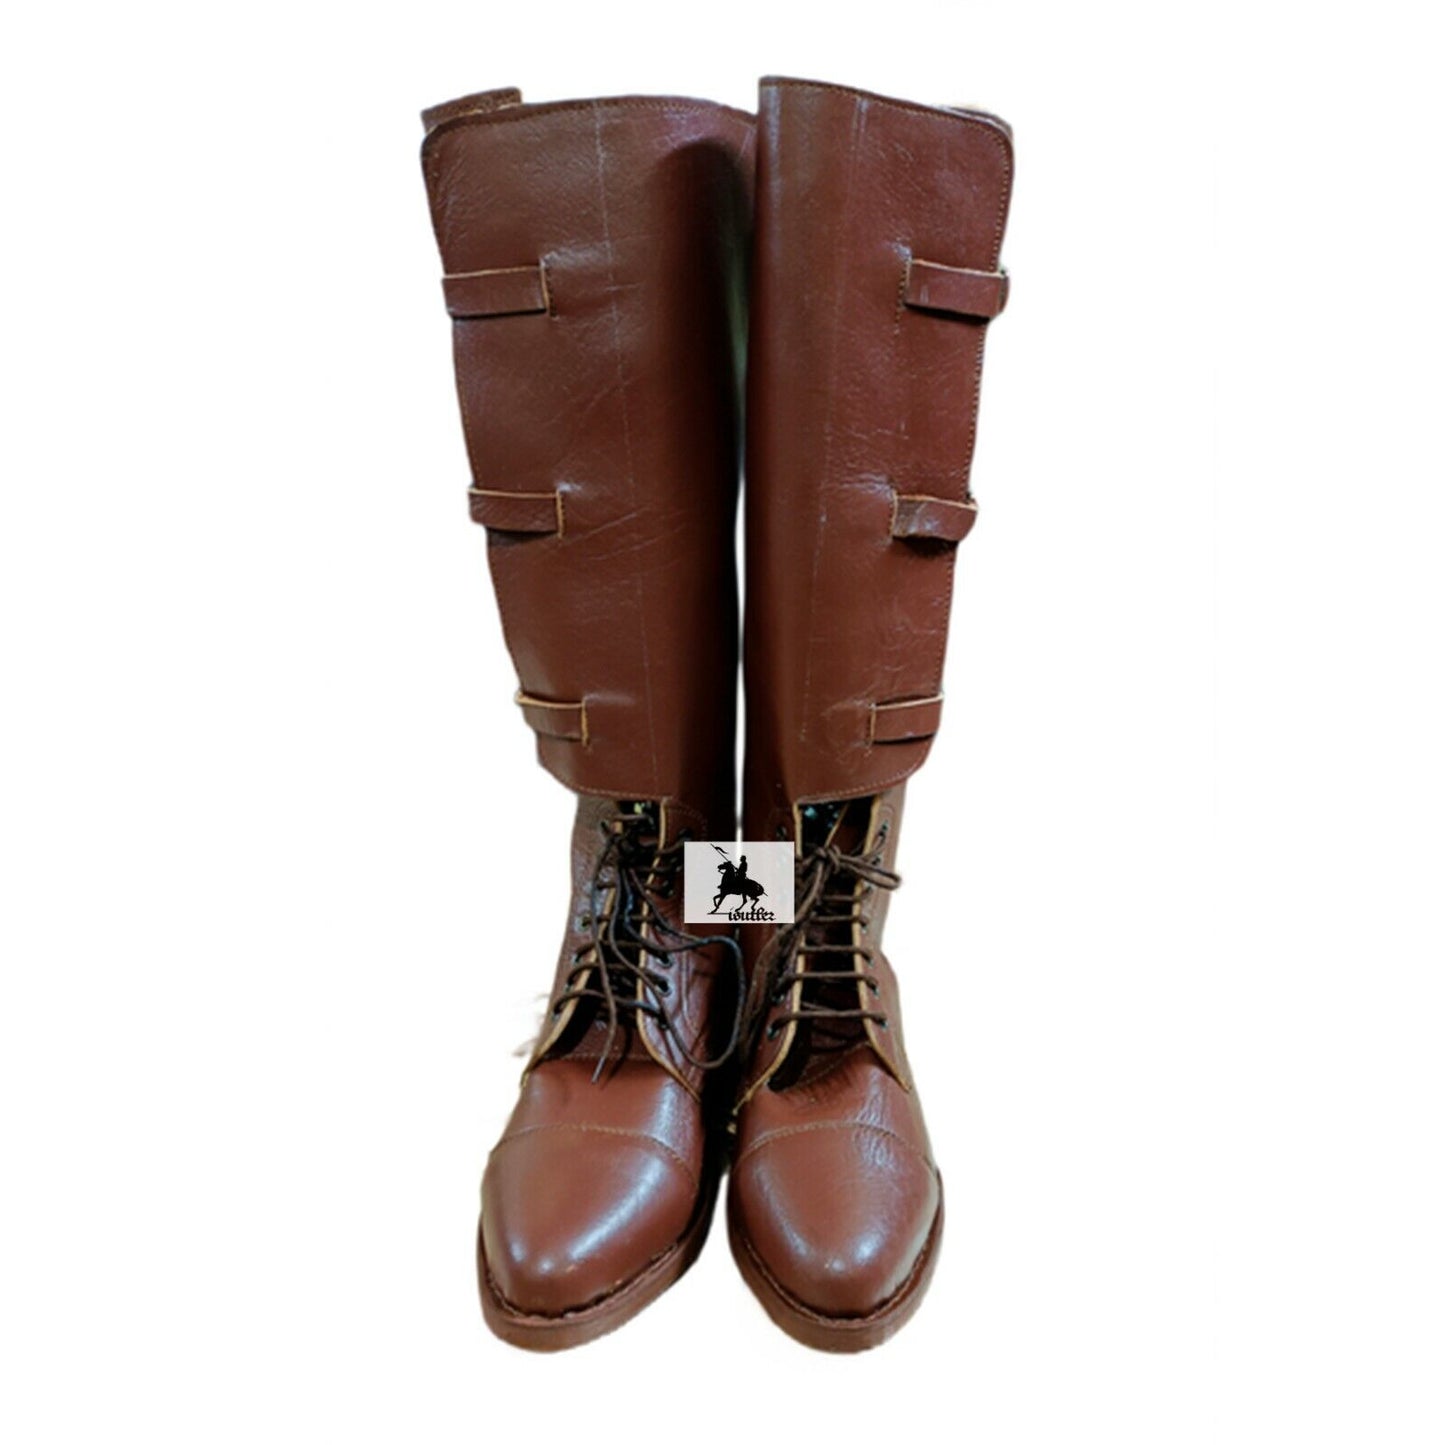 Brown Leather Horse Ridding Boot With Three Buckles | Handmade Leather Boots | Long Boots | Fashion Boots for Men & Women